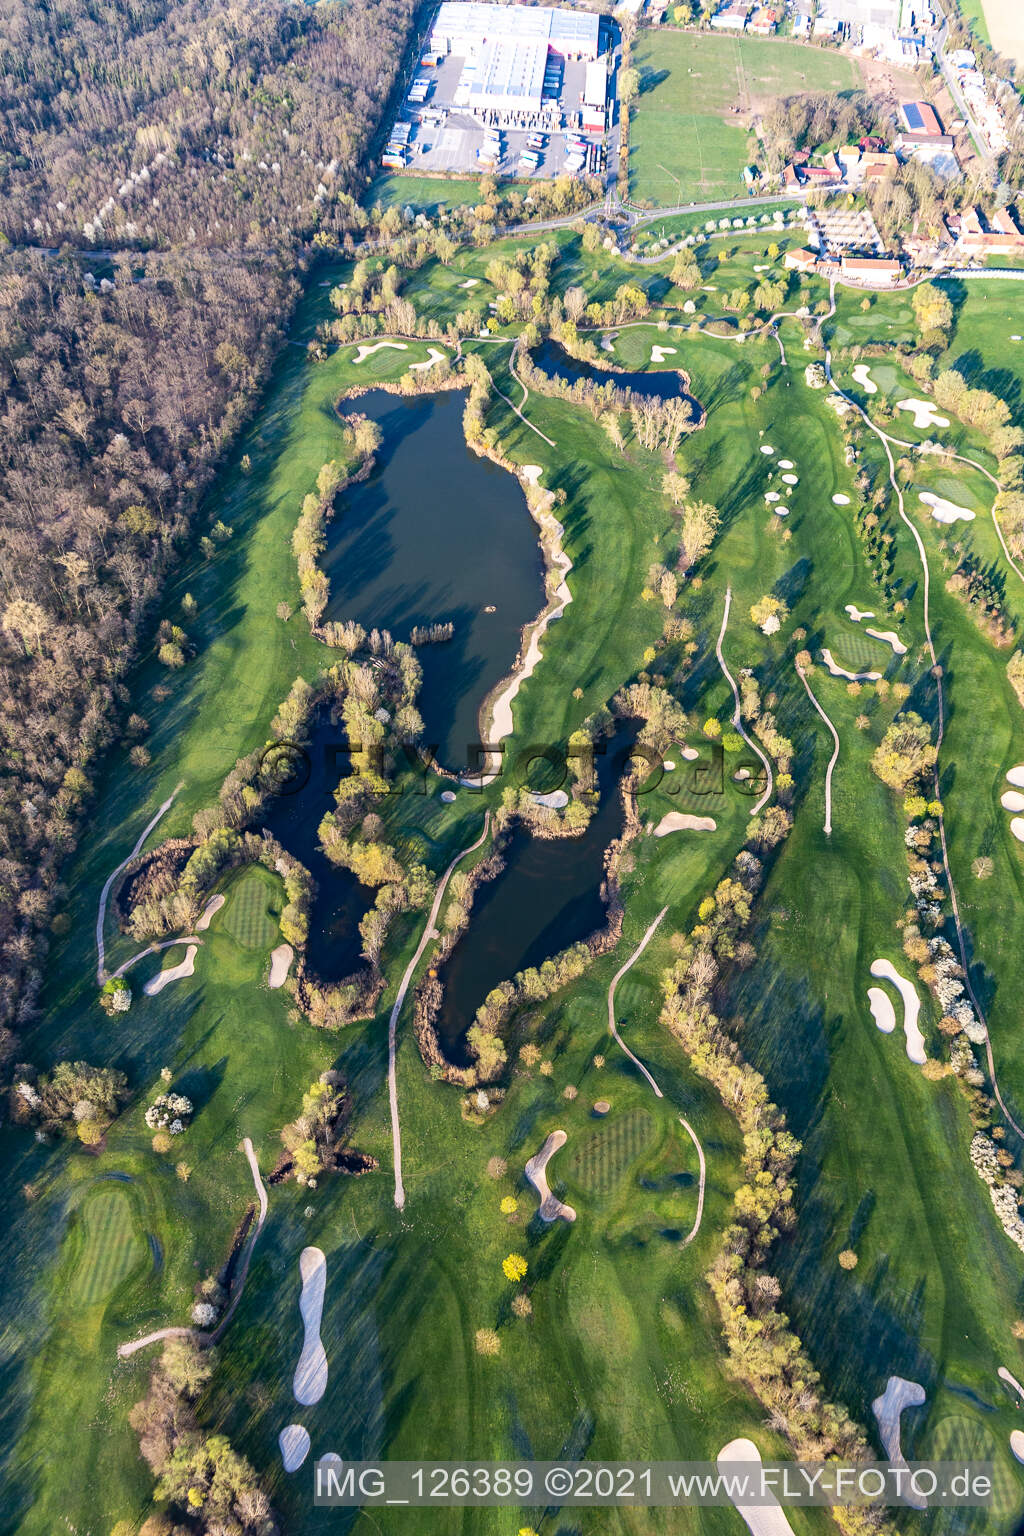 Blooming trees in the spring on the grounds of the Golf course at Landgut Dreihof GOLF absolute in Essingen in the state Rhineland-Palatinate from the plane